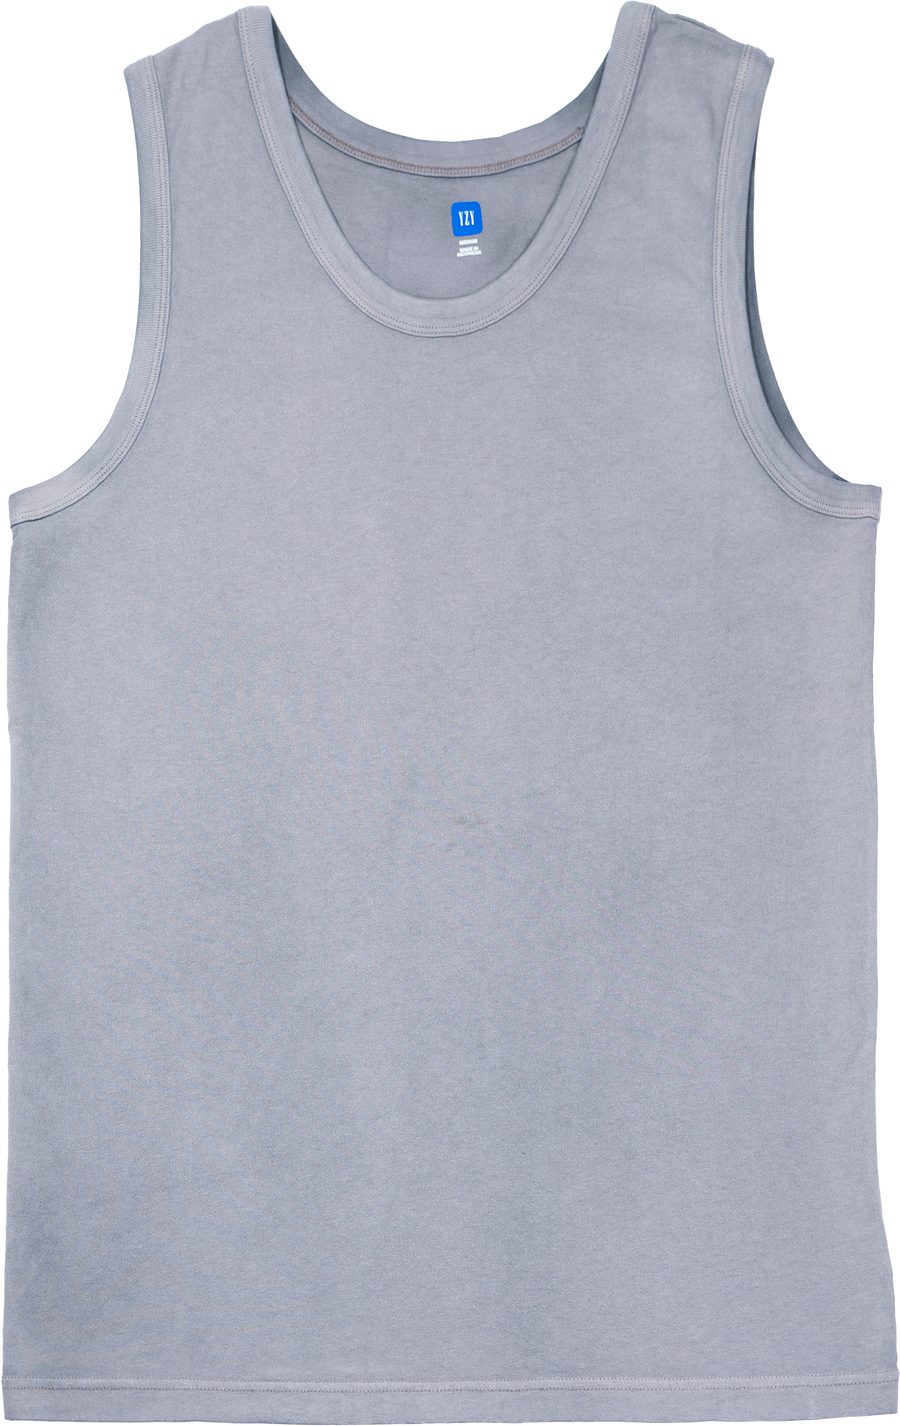 Re-Stock Yeezy X Gap Tank Top Unreleased - All Sizes + All Colors